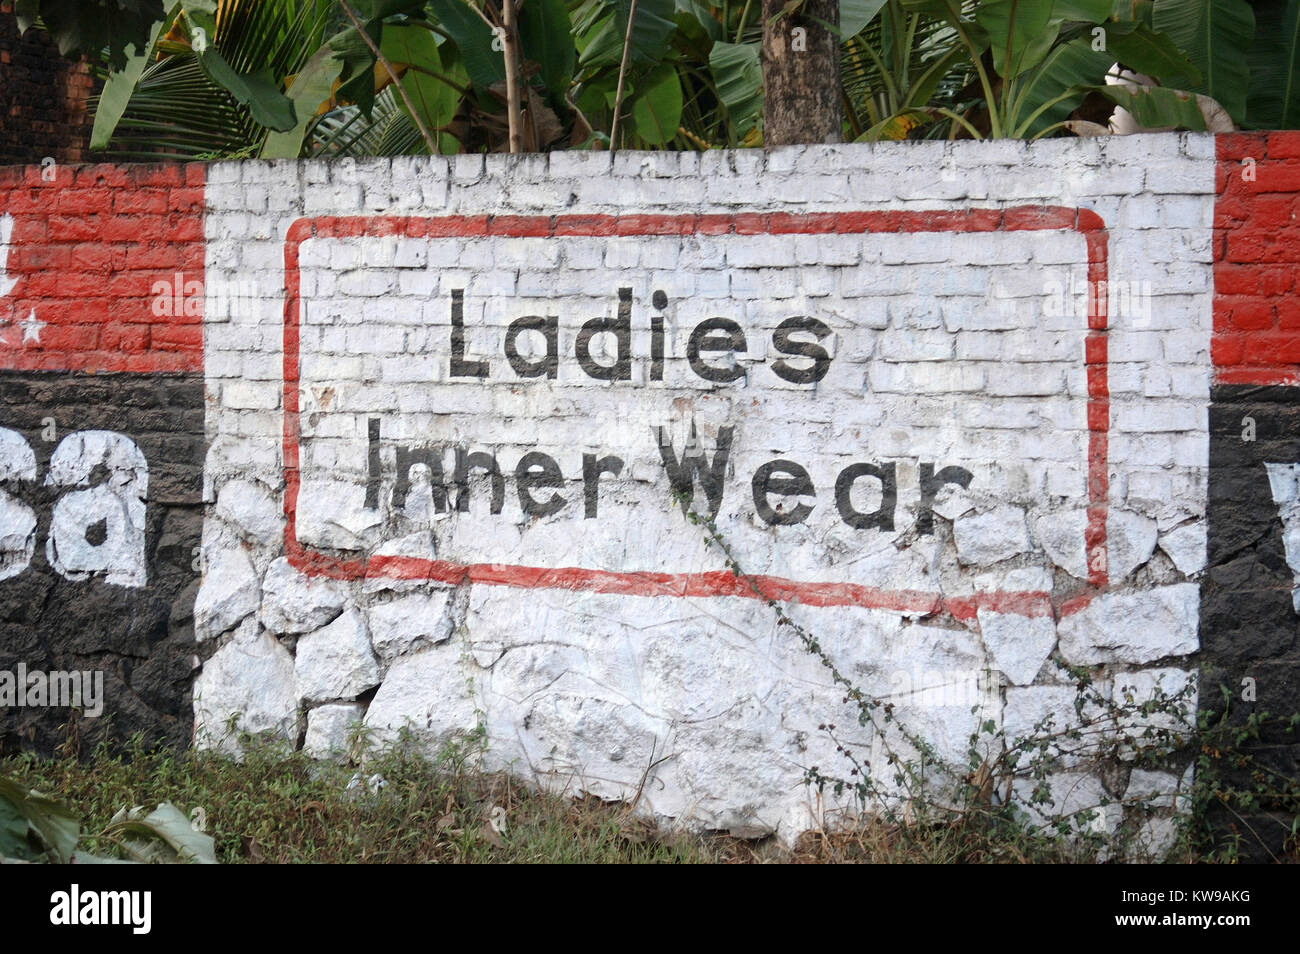 Advertisement in Tamlish for Ladies Inner Wear, Tamil Nadu, South India  Stock Photo - Alamy